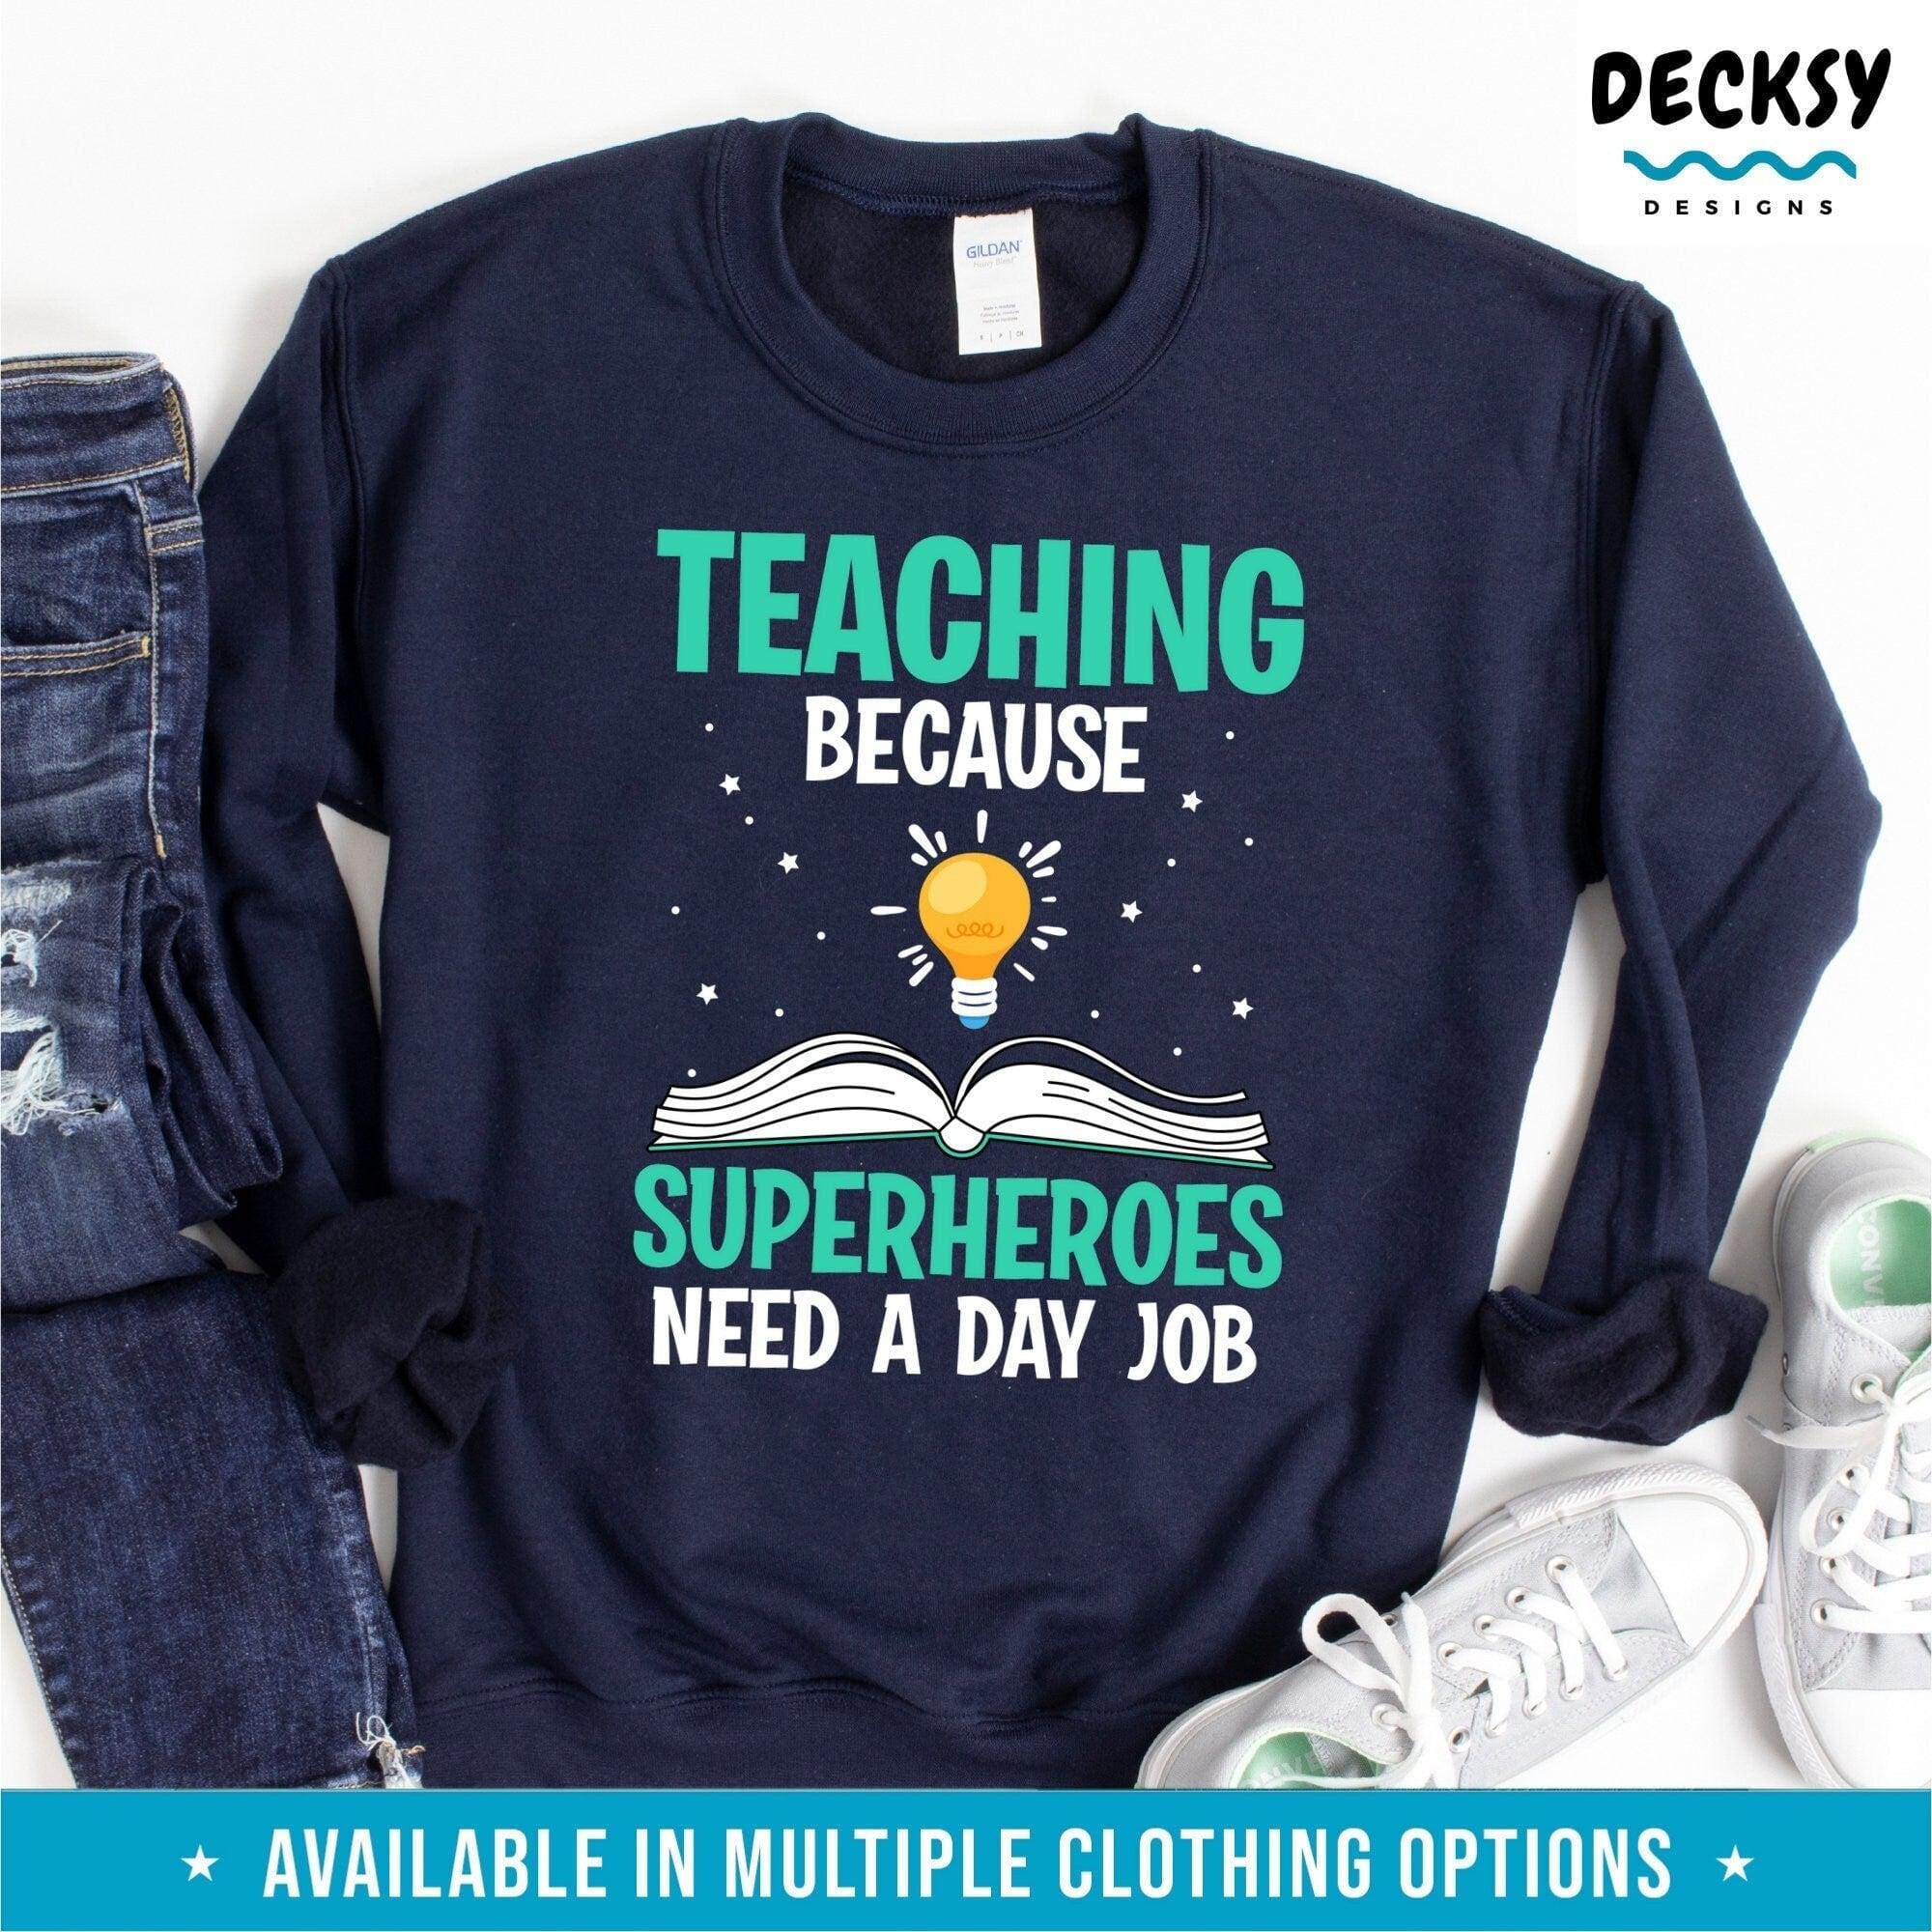 Teacher Shirt, Funny Gift for Teacher-Clothing:Gender-Neutral Adult Clothing:Tops & Tees:T-shirts:Graphic Tees-DecksyDesigns